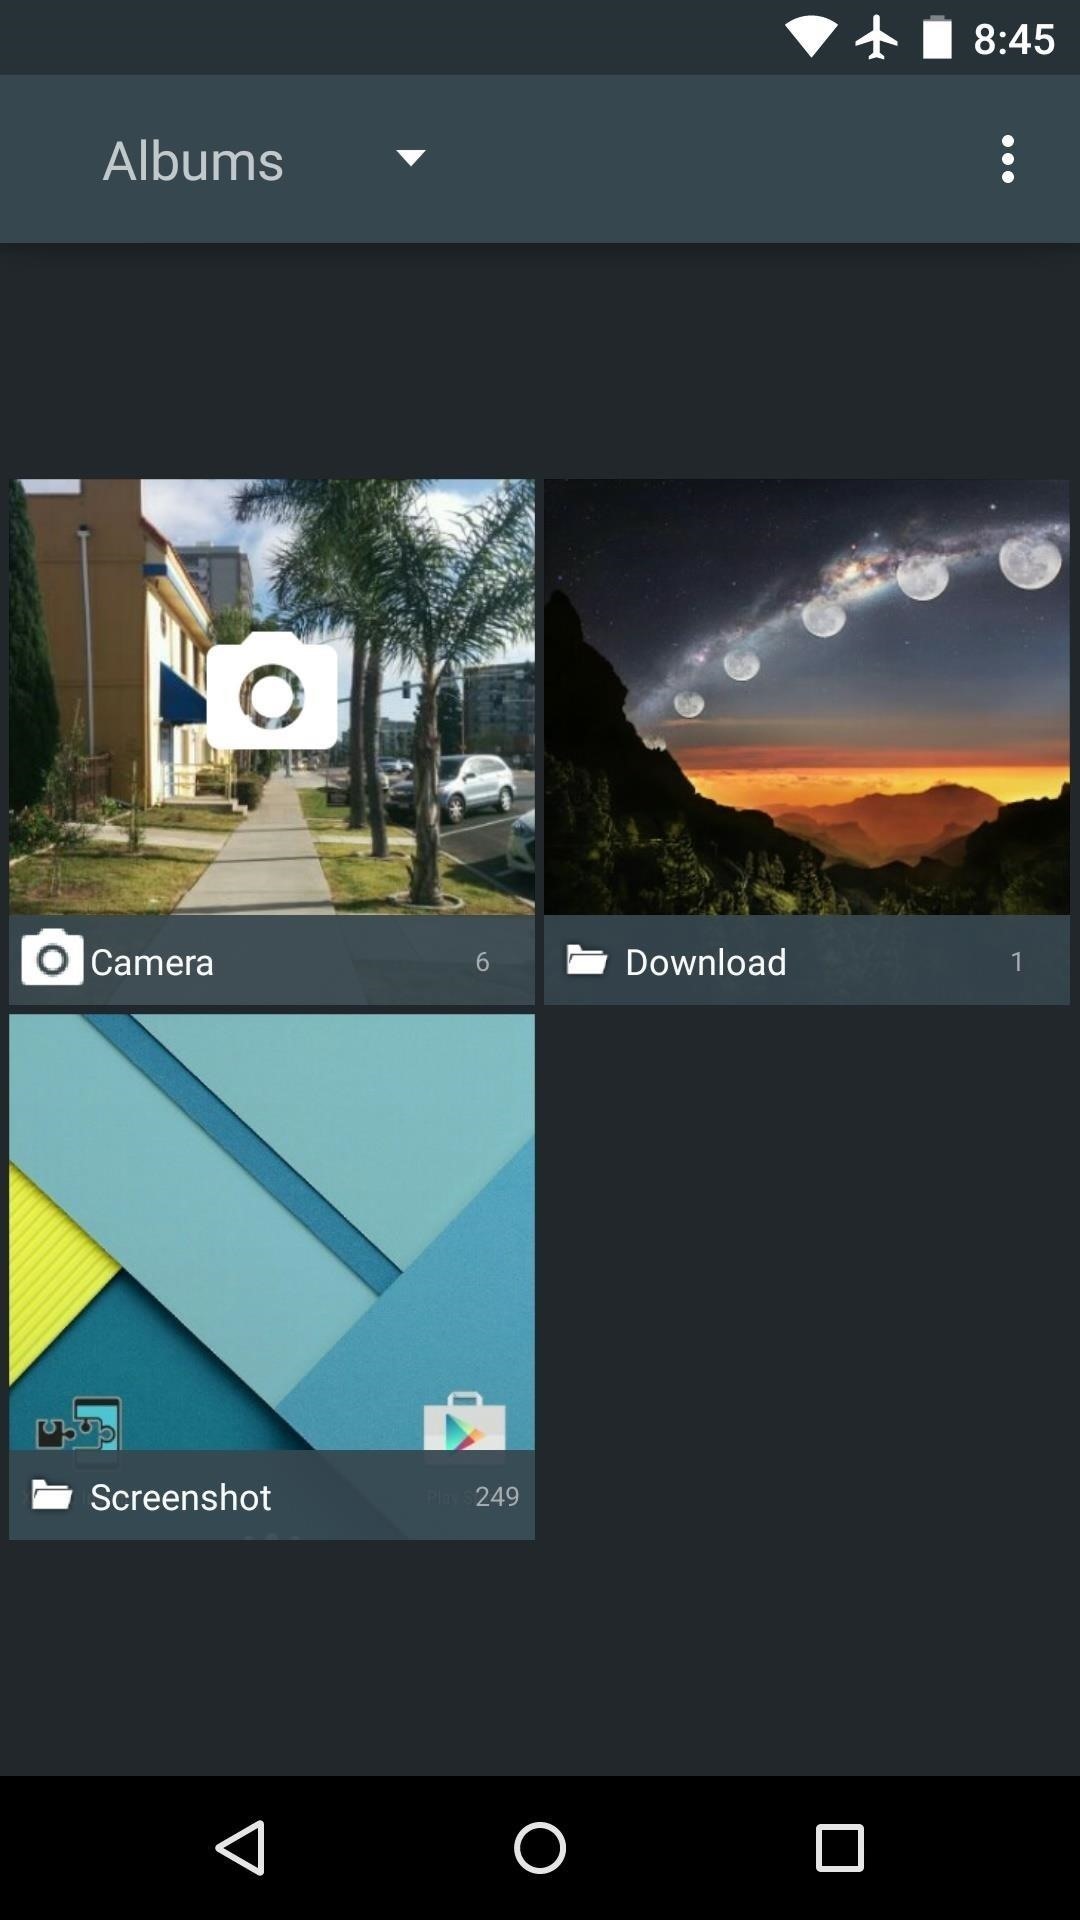 10 Awesome Android Apps You Won't Find on Google Play